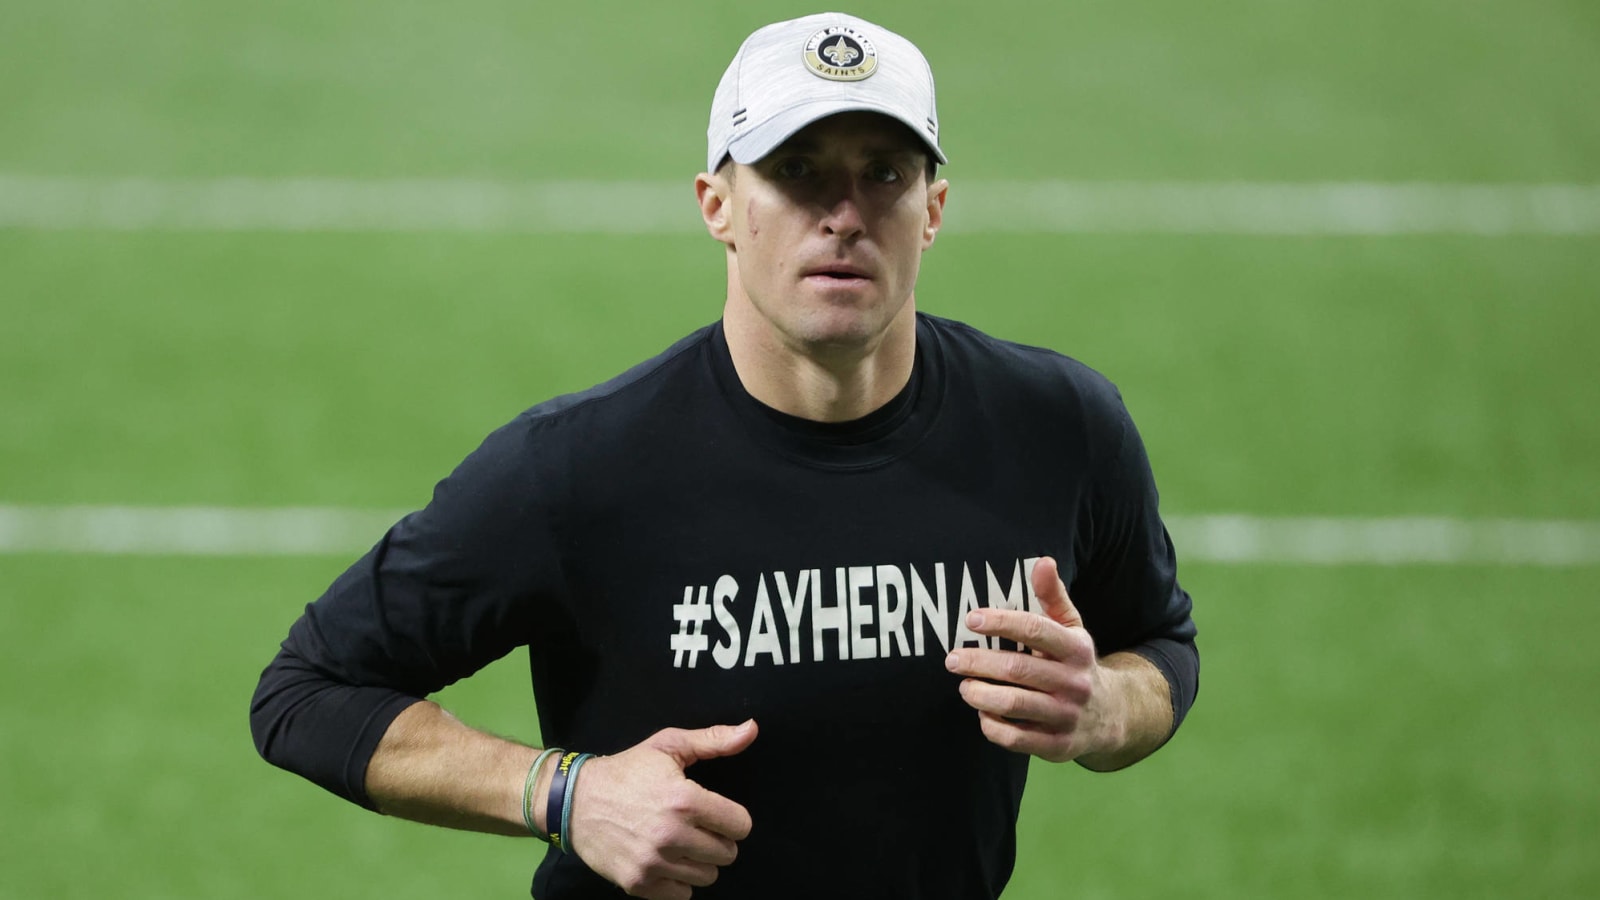 Trainer hints Drew Brees could return in workout video